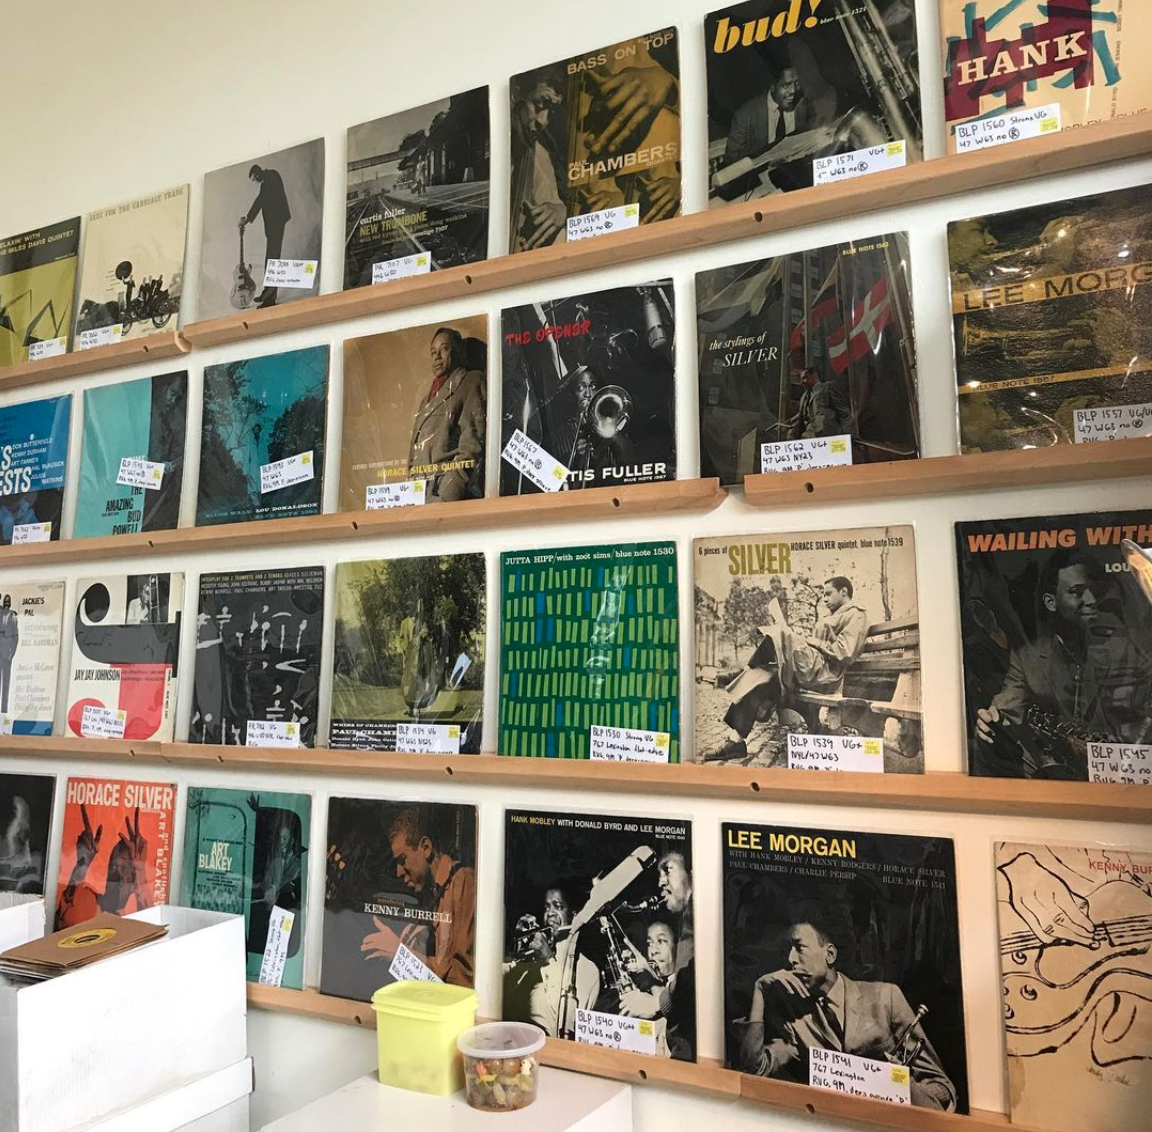 We Found the 10 Best Record Stores in Detroit - Sumiko Phono